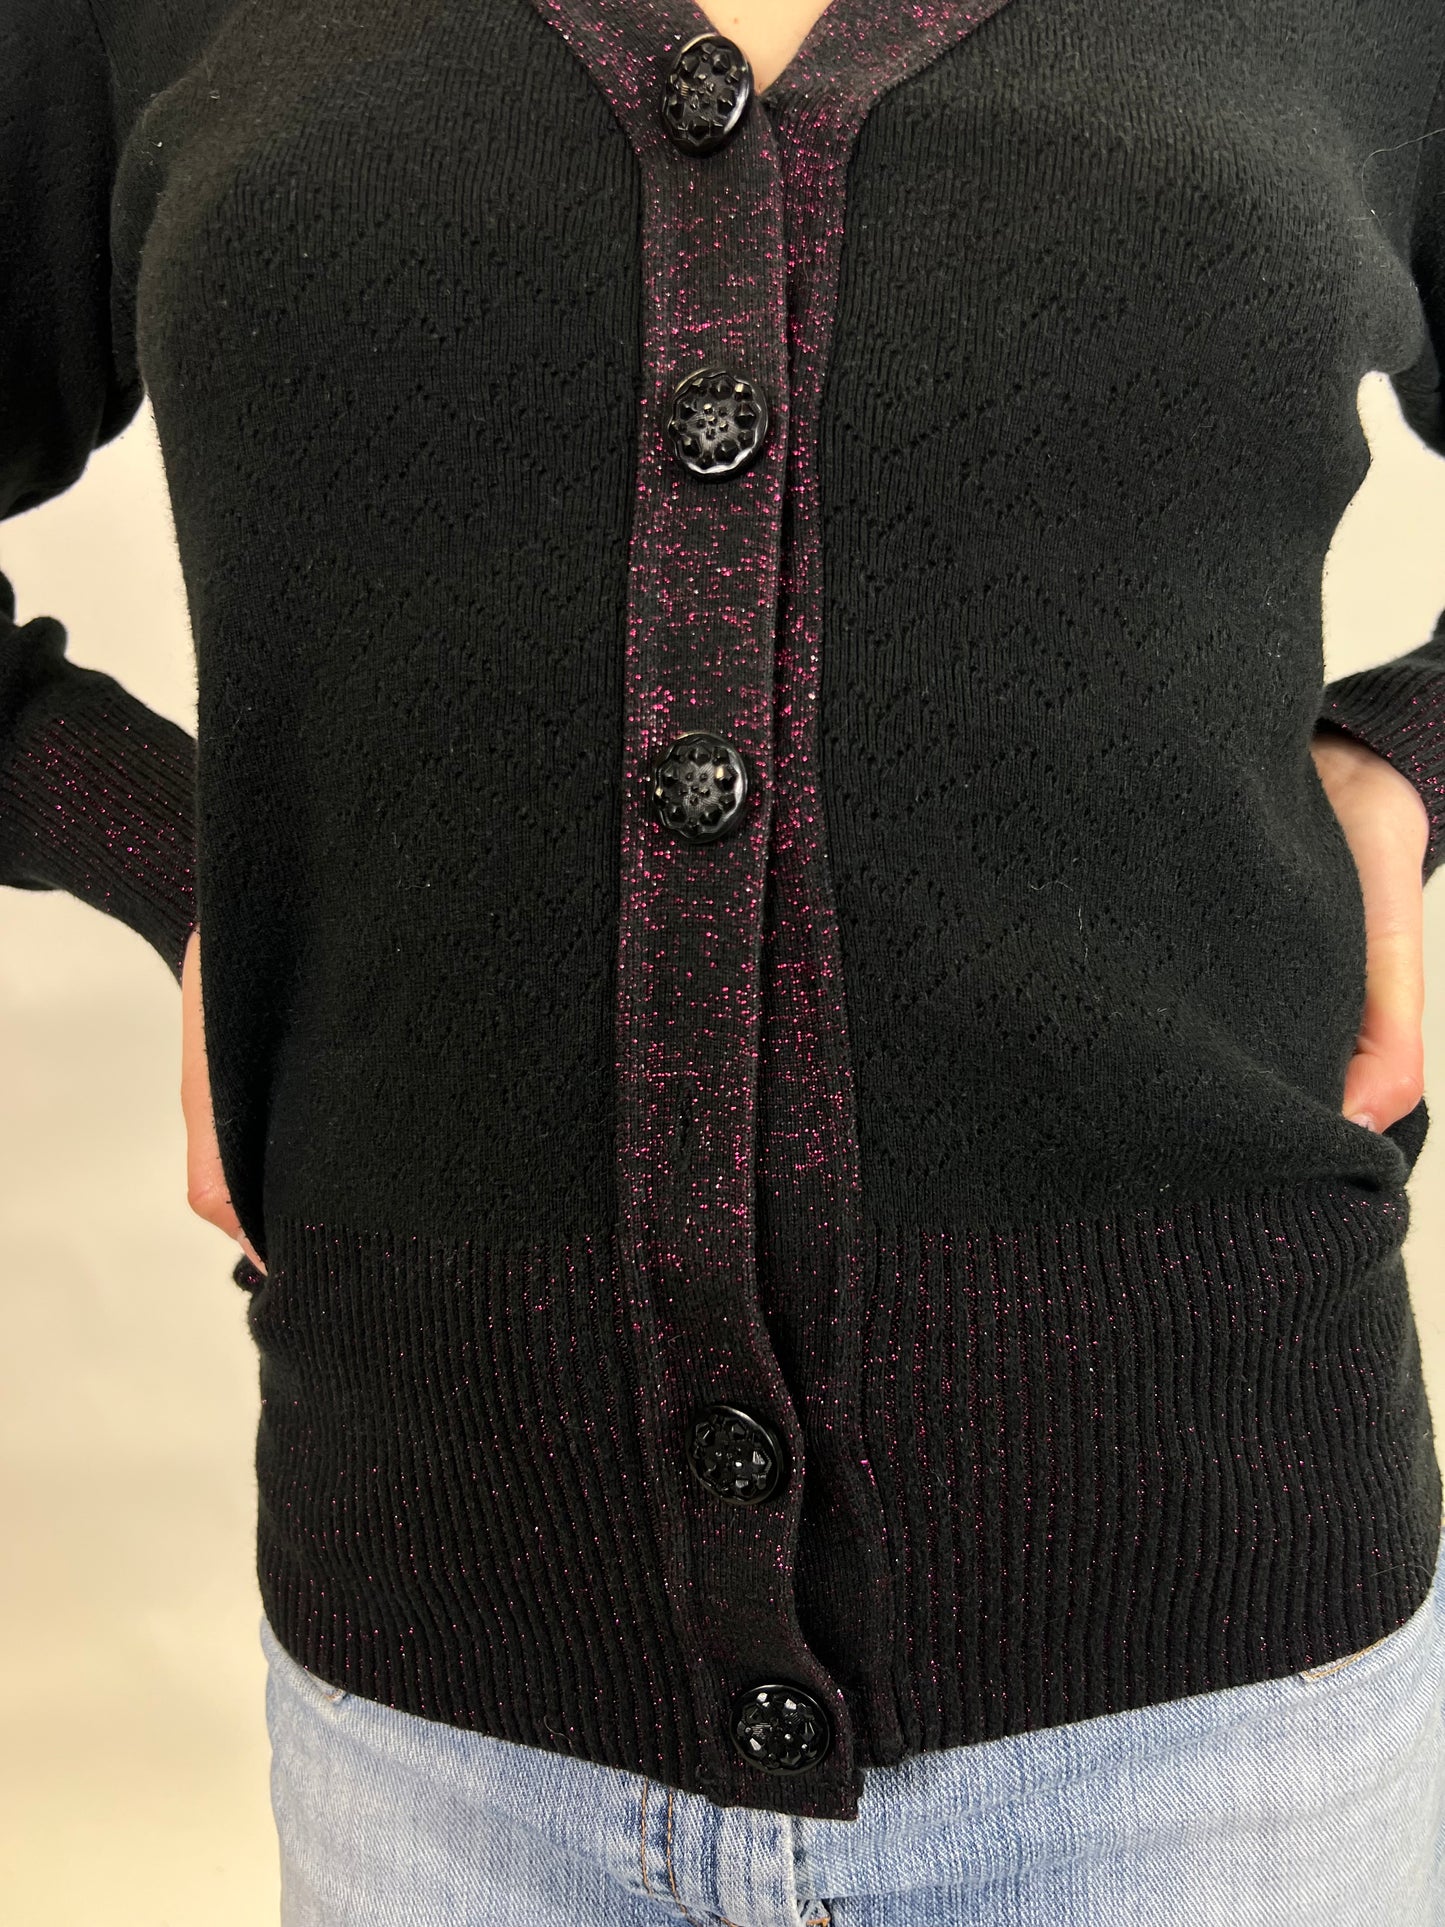 Black Knit Cardigan with Pink Glitter Detail